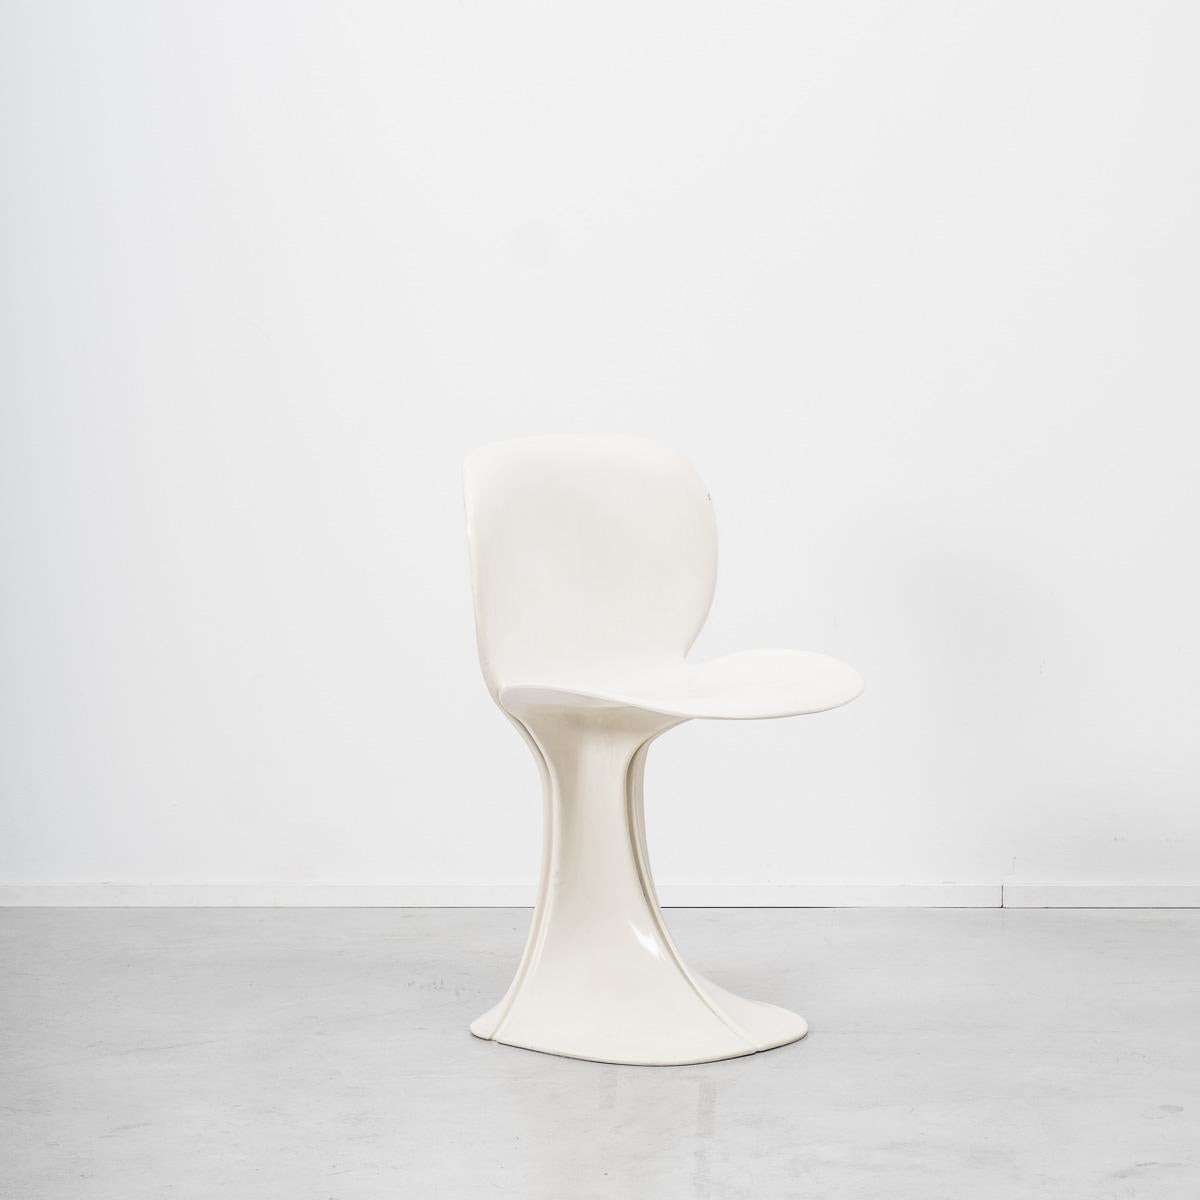 Late 20th Century Pierre Paulin 8810 Flower Chair and Table Boro, Beligium, 1970s